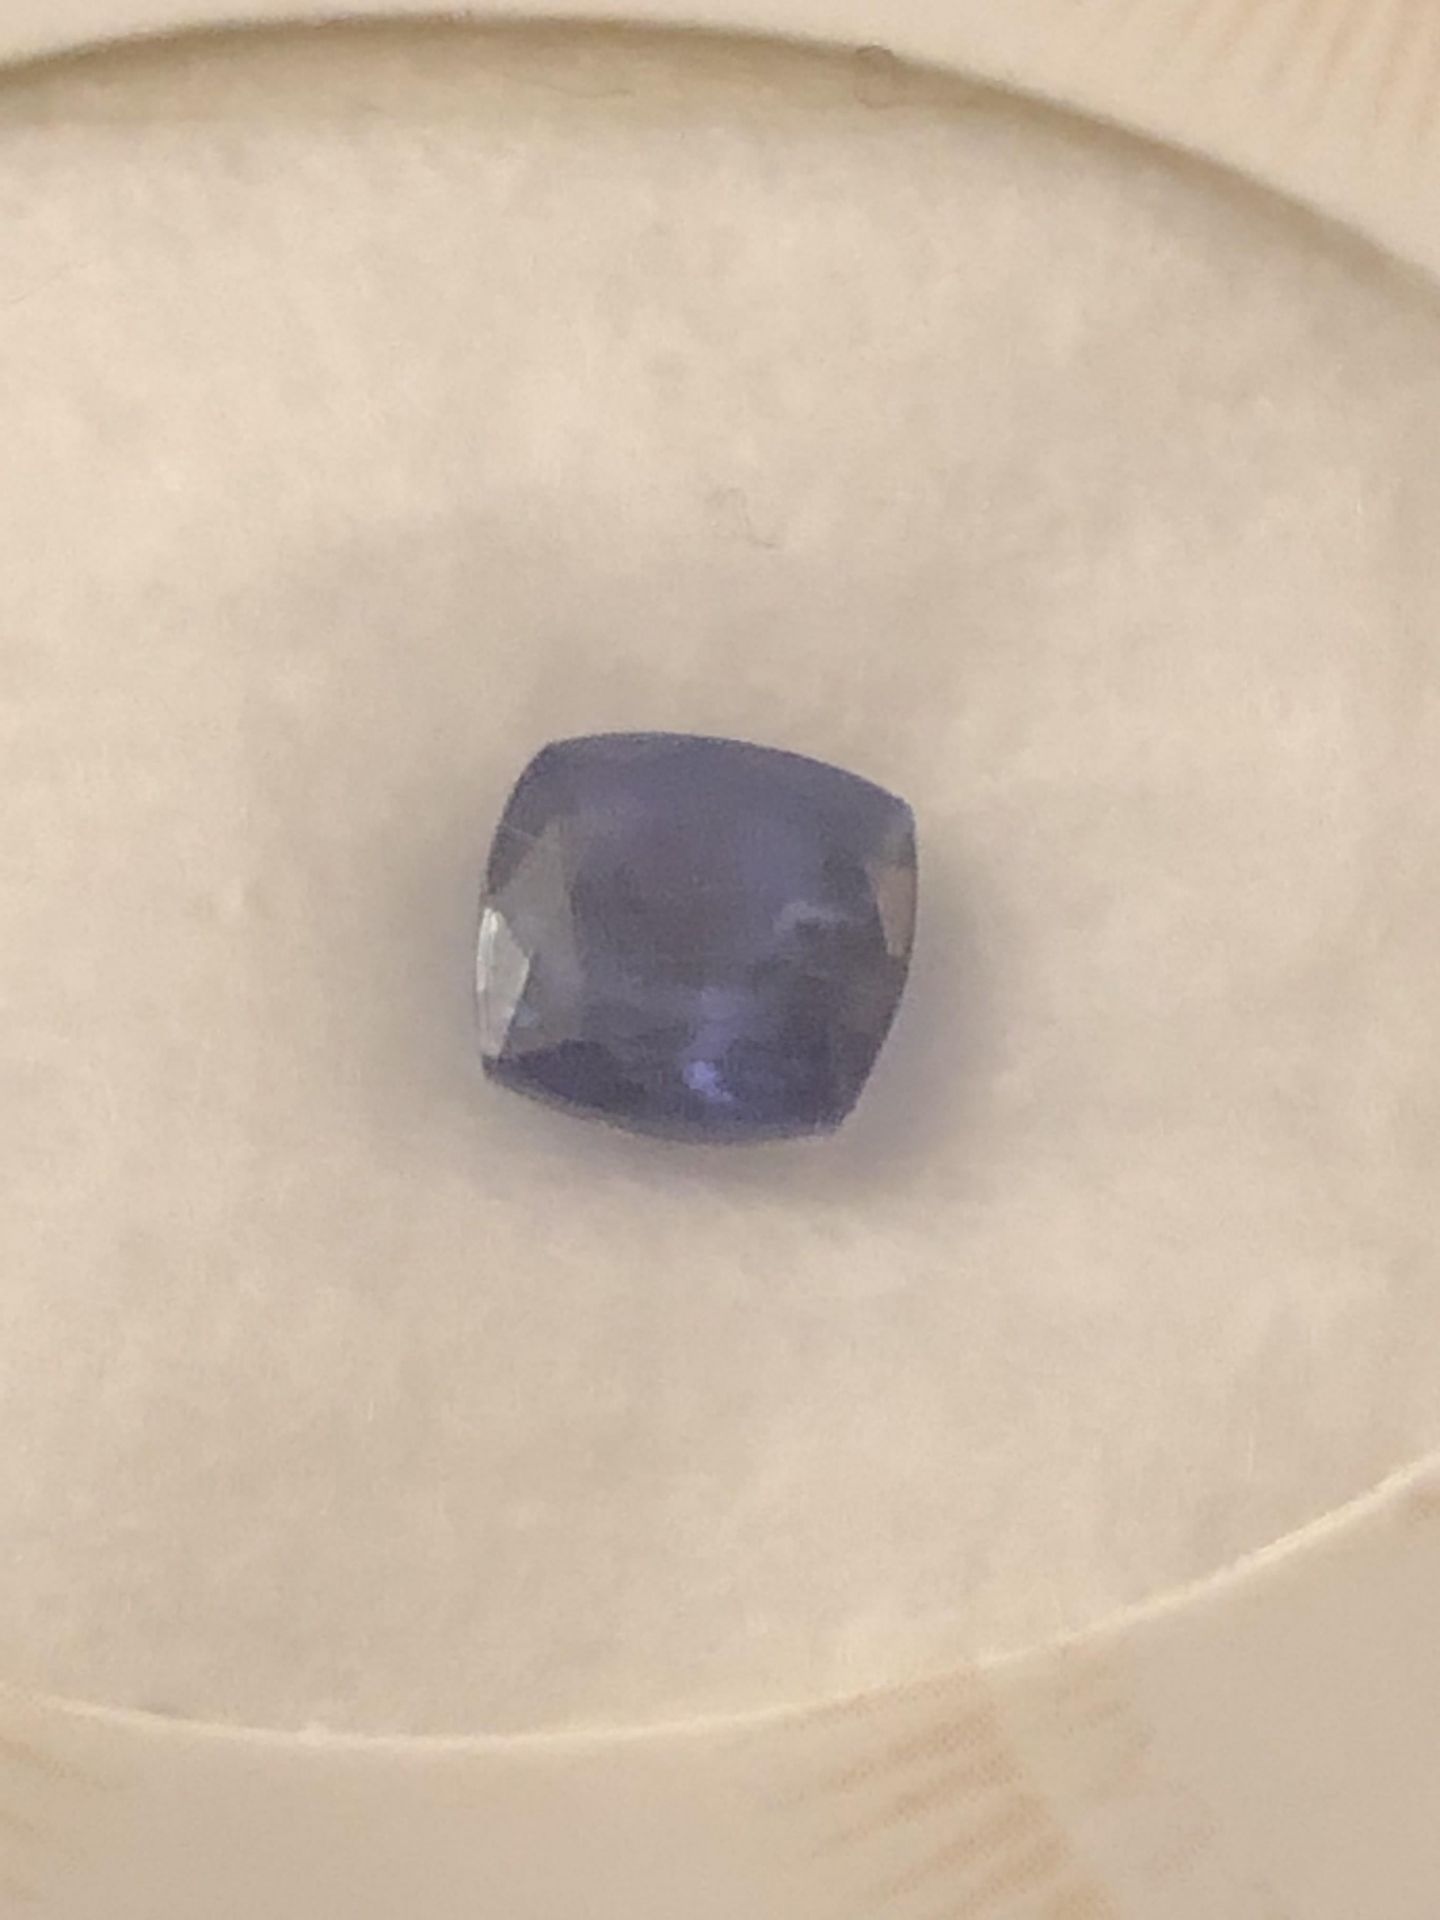 1.72ct Natural Tanzanite with GIL Certificate - Image 3 of 3